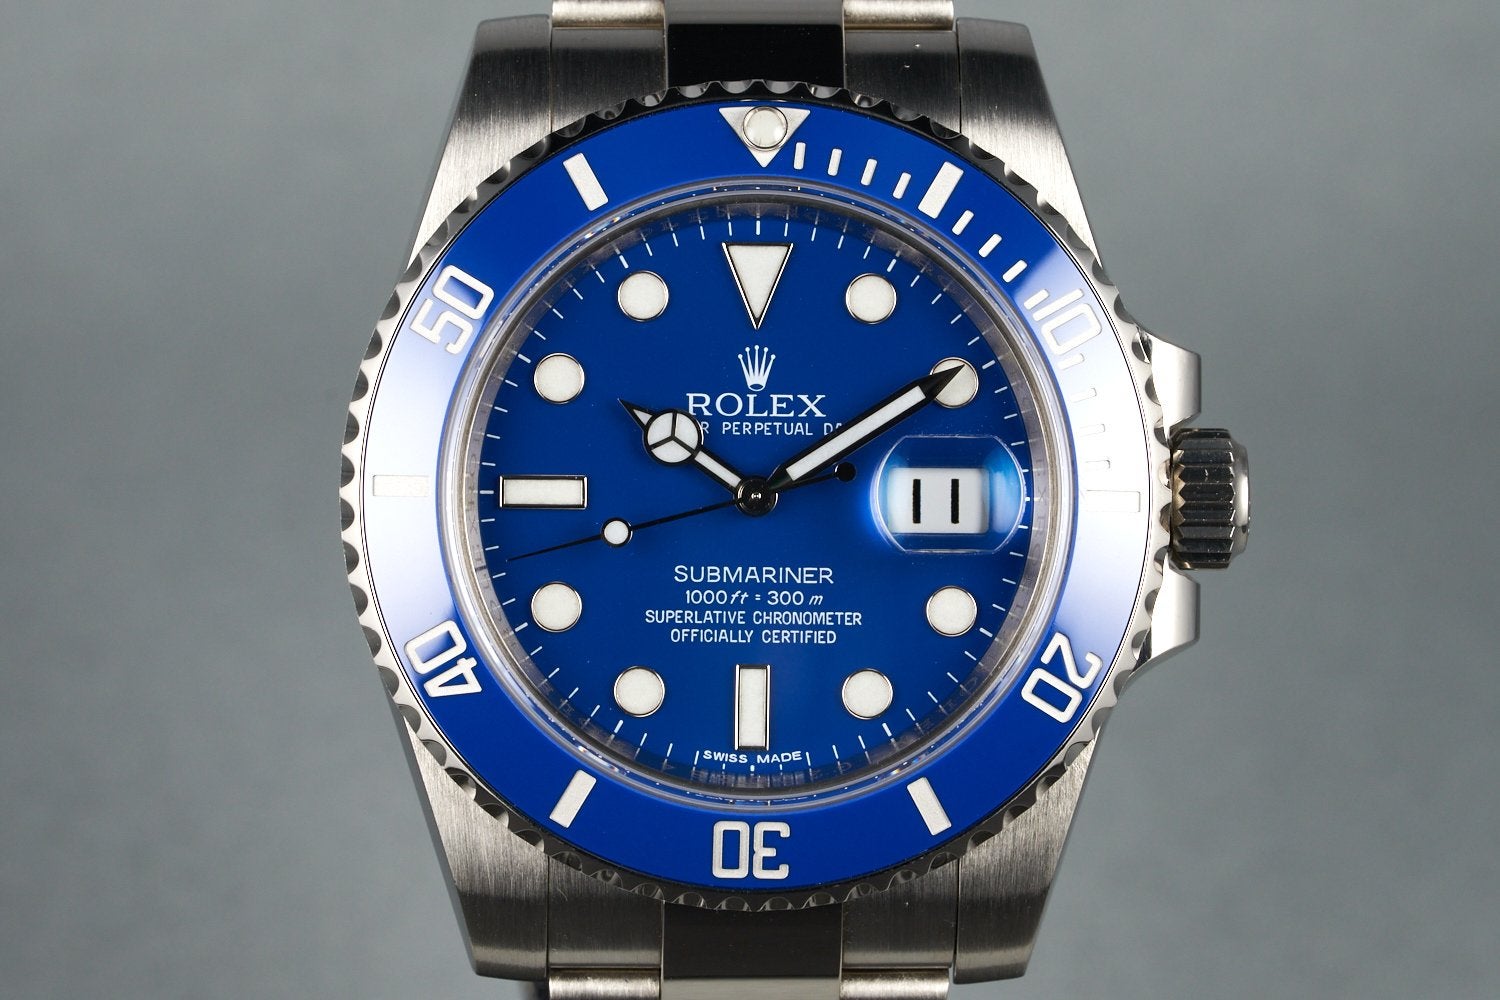 FS: 2010 Rolex White Gold Submariner Ref: 116619LB with Box and Papers " Smurf" | FintechZoom Rolex Submariner